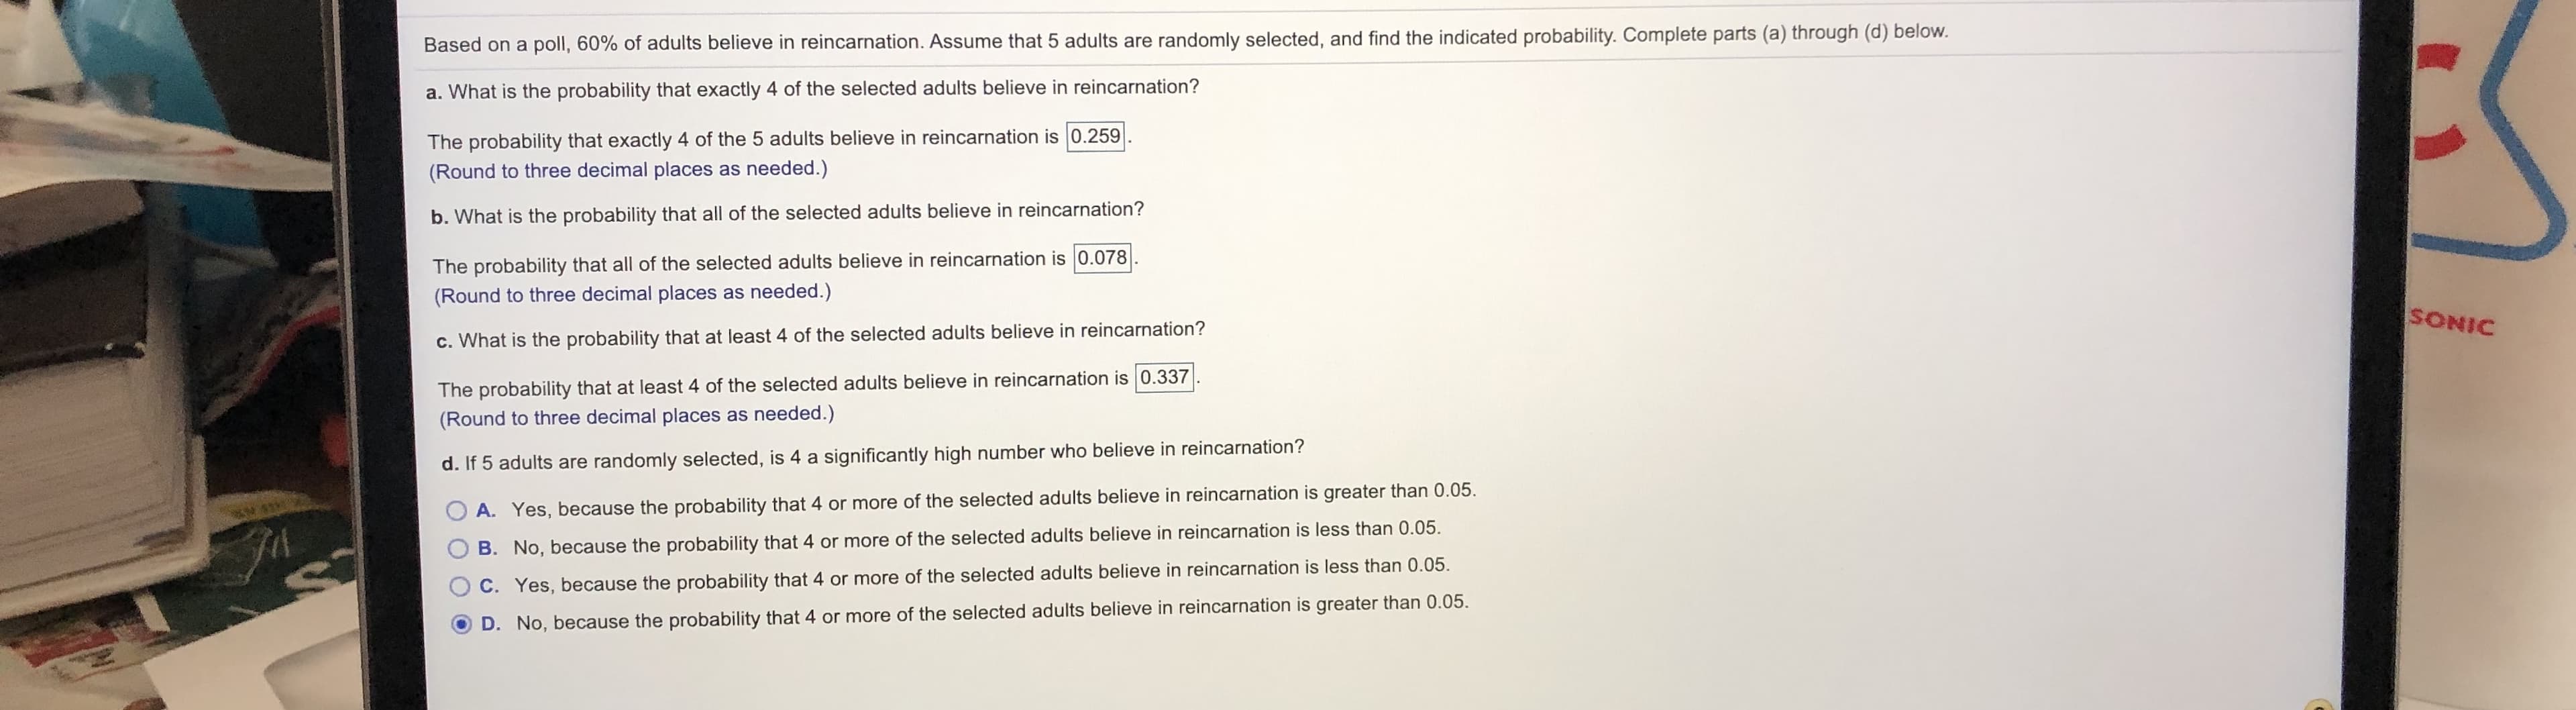 Based on a poll, 60% of adults believe in reincarnation. Assume that 5 adults are randomly selected, and find the indicated probability. Complete parts (a) through (d) below.
a. What is the probability that exactly 4 of the selected adults believe in reincarnation?
The probability that exactly 4 of the 5 adults believe in reincarnation is 0.259
(Round to three decimal places as needed.)
b. What is the probability that all of the selected adults believe in reincarnation?
The probability that all of the selected adults believe in reincarnation is 0.078
(Round to three decimal places as needed.)
SONIC
c. What is the probability that at least 4 of the selected adults believe in reincarnation?
The probability that at least 4 of the selected adults believe in reincarnation is 0.337
(Round to three decimal places as needed.)
d. If 5 adults are randomly selected, is 4 a significantly high number who believe in reincarnation?
A. Yes, because the probability that 4 or more of the selected adults believe in reincarnation is greater than 0.05.
B. No, because the probability that 4 or more of the selected adults believe in reincarnation is less than 0.05.
C. Yes, because the probability that
D. No, because the probability that 4 or more of the selected adults believe in reincarnation is greater than 0.05.
or more of the selected adults believe in reincarnation is less than 0.05.
